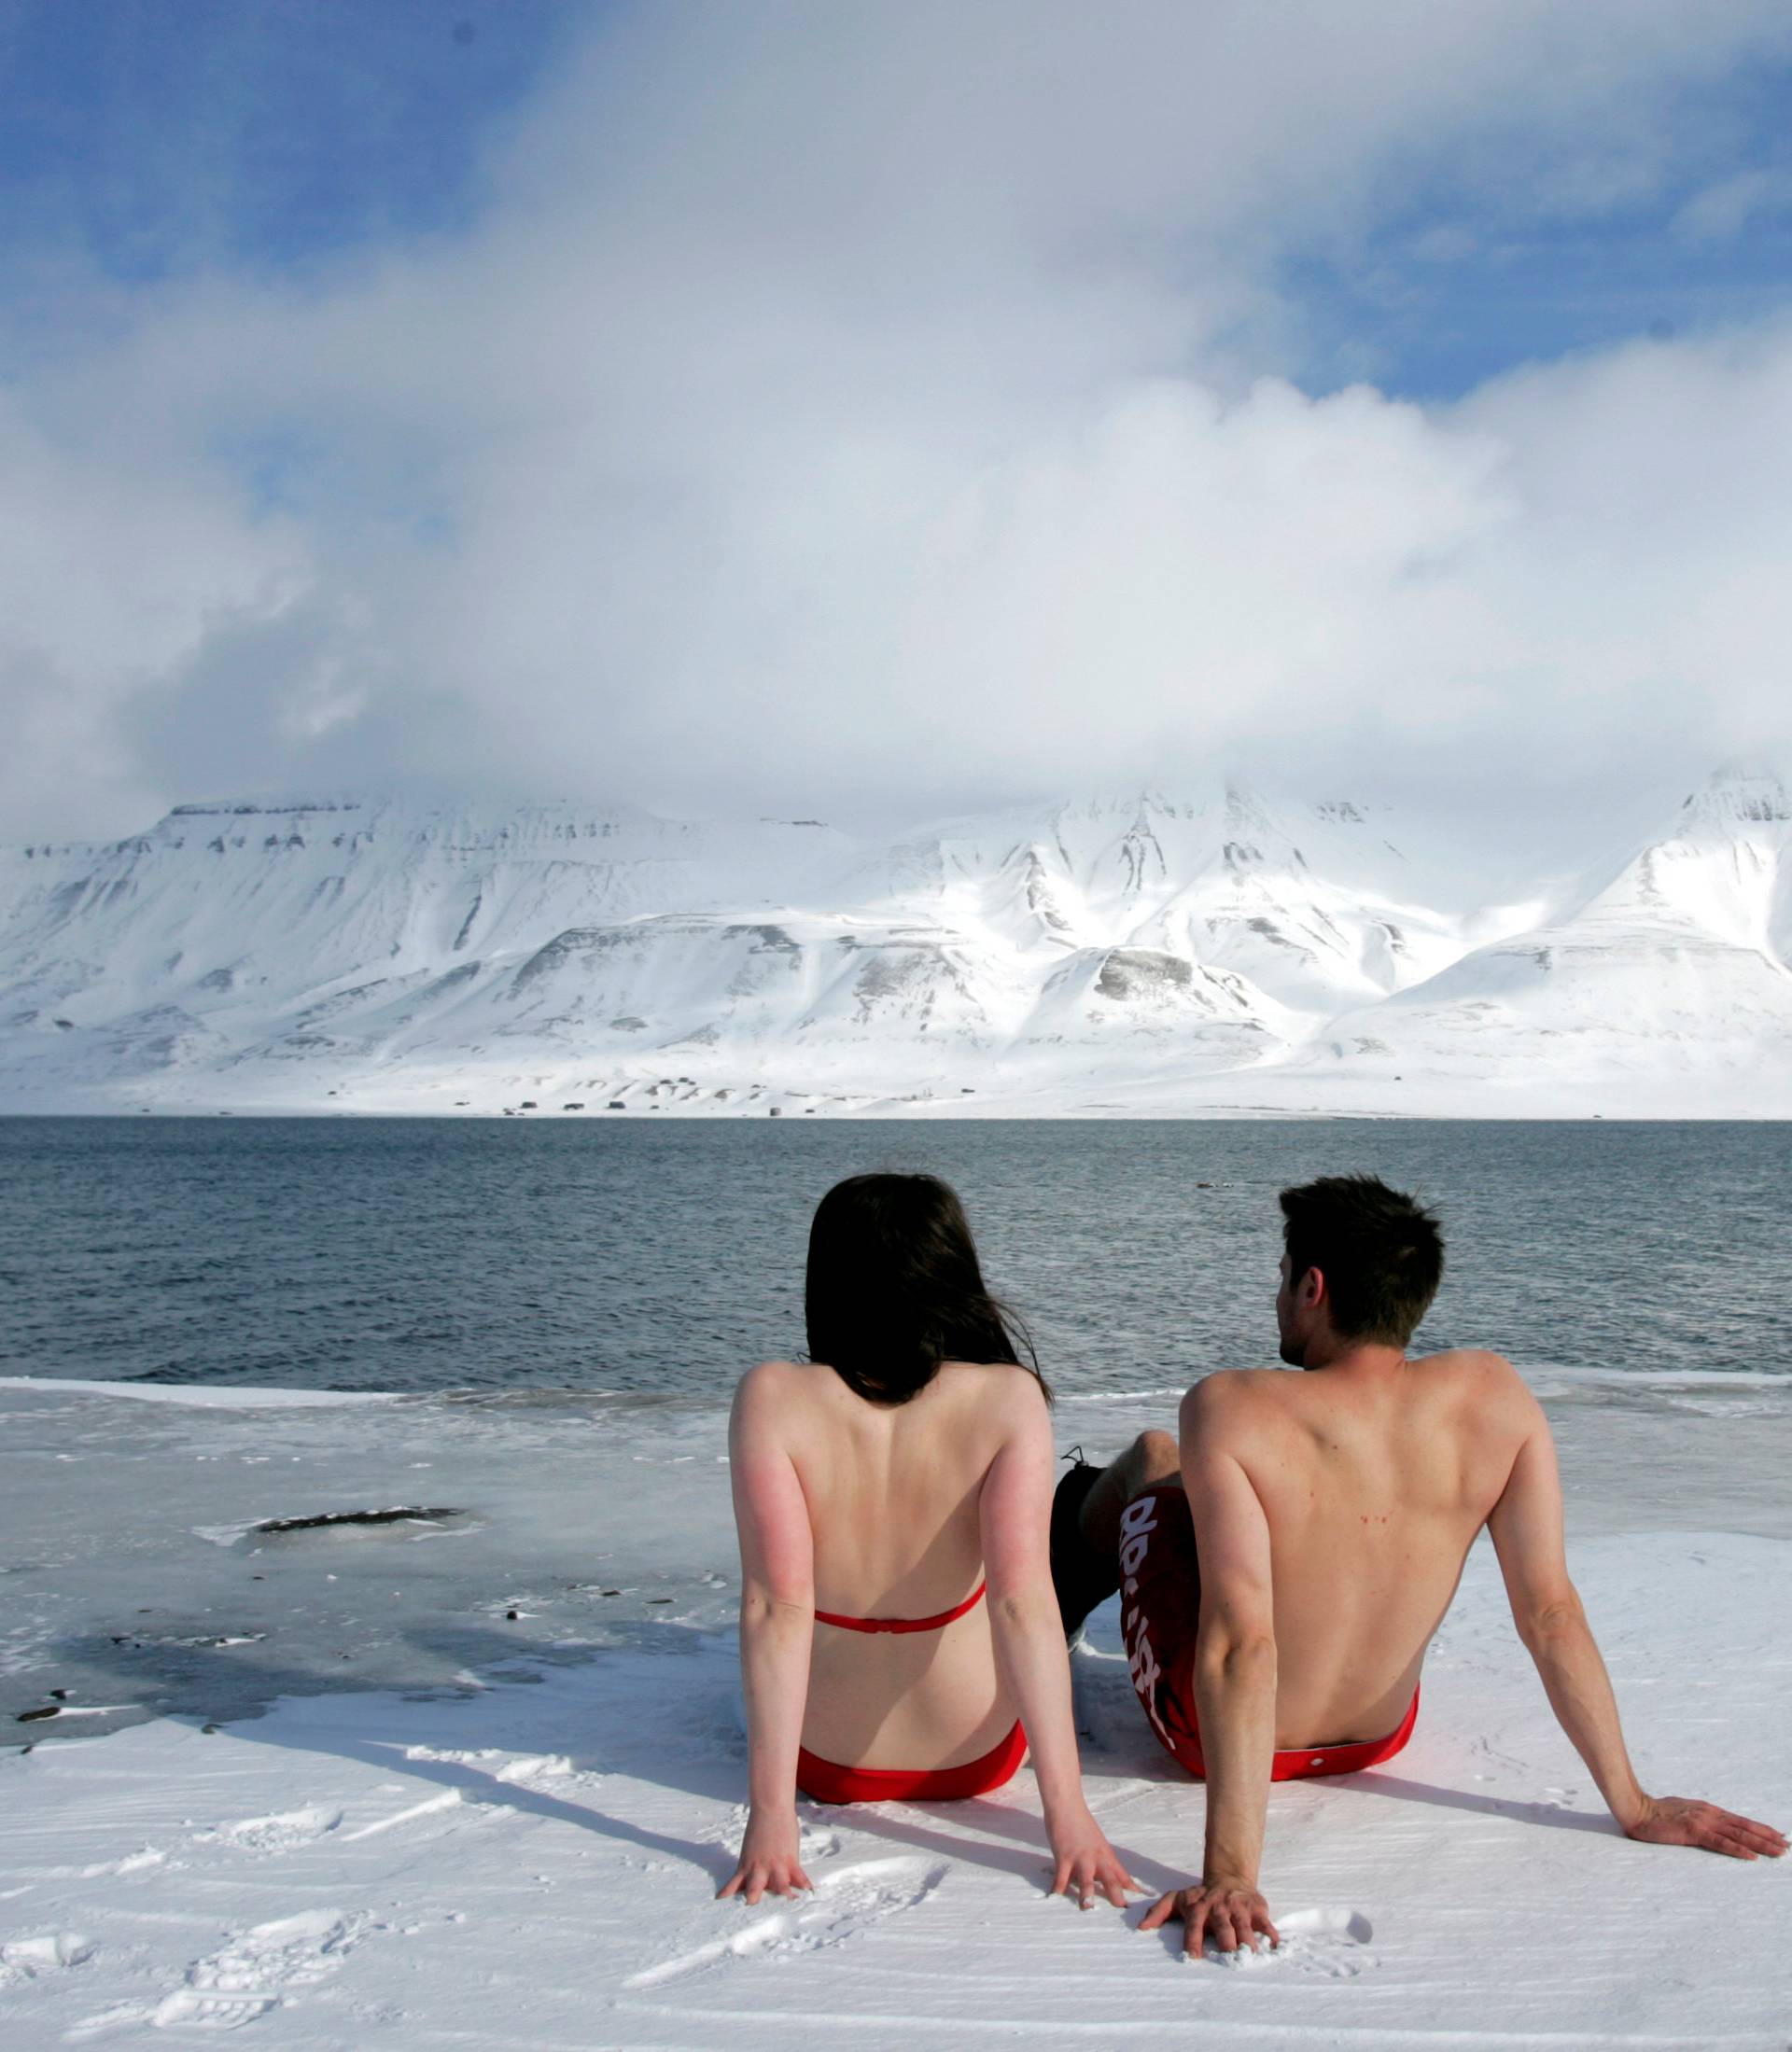 FILE PHOTO: Climate activists Lesley Butler and Rob Bell "sunbathe" on the edge of a frozen fjord in the Norwegian Arctic town of Longyearbyen